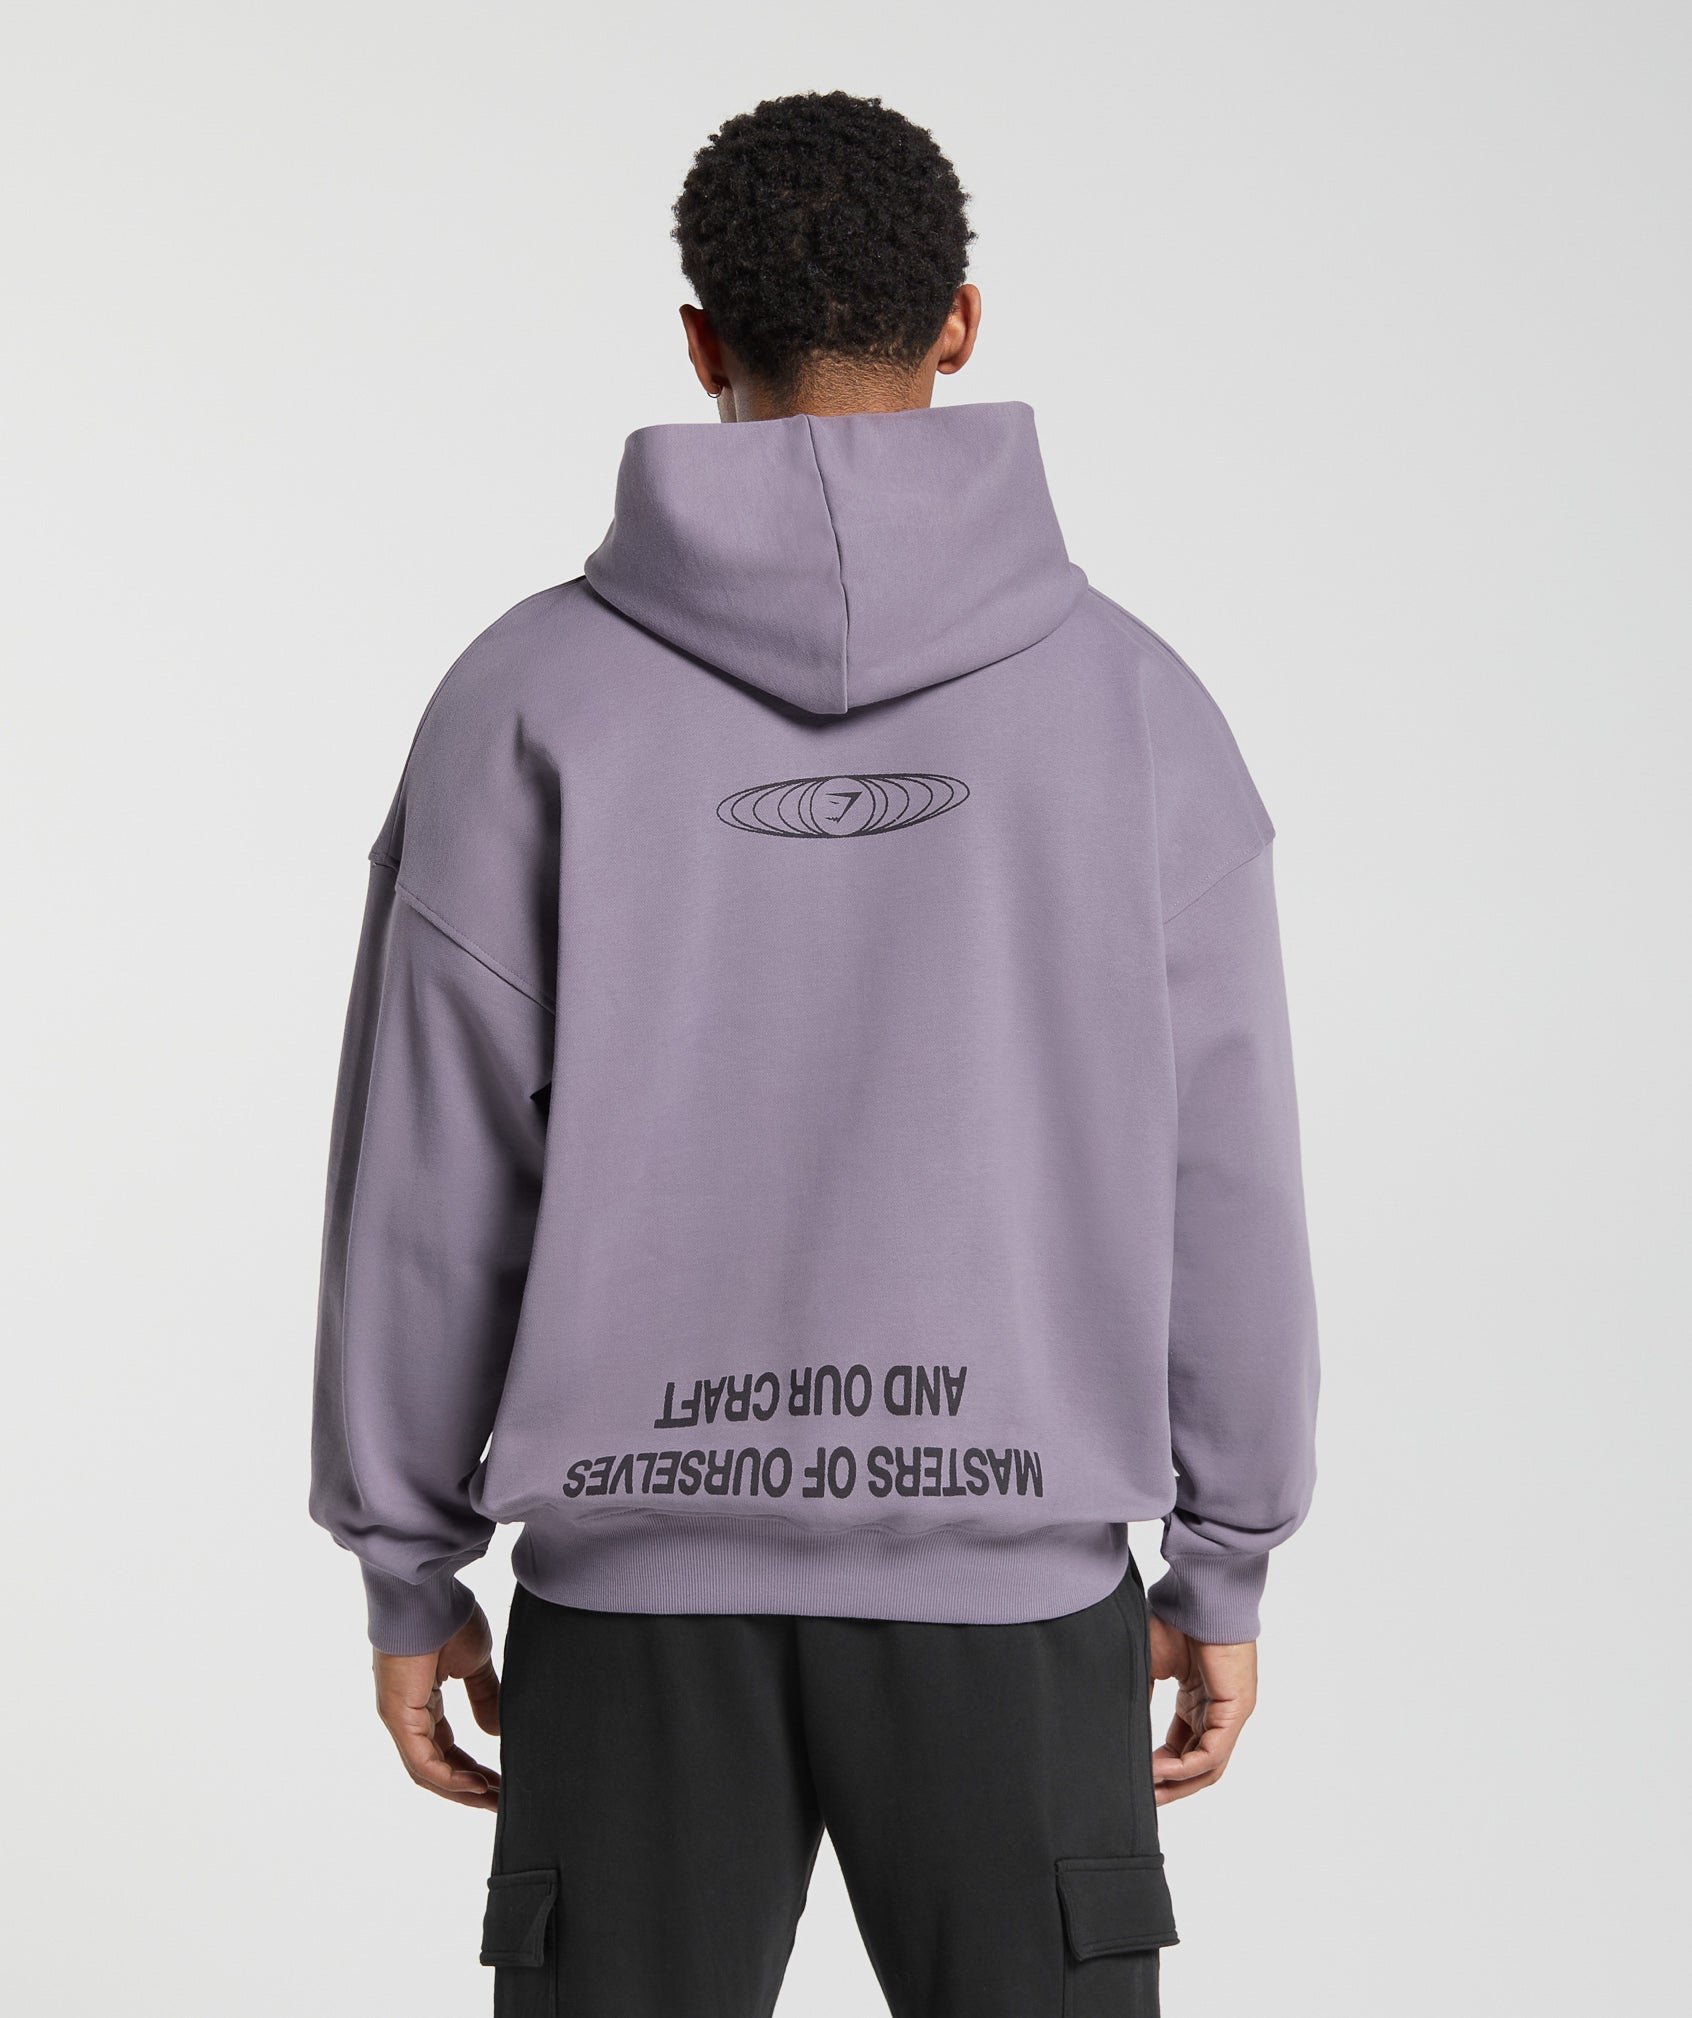 Masters of Our Craft Hoodie in Fog Purple - view 2